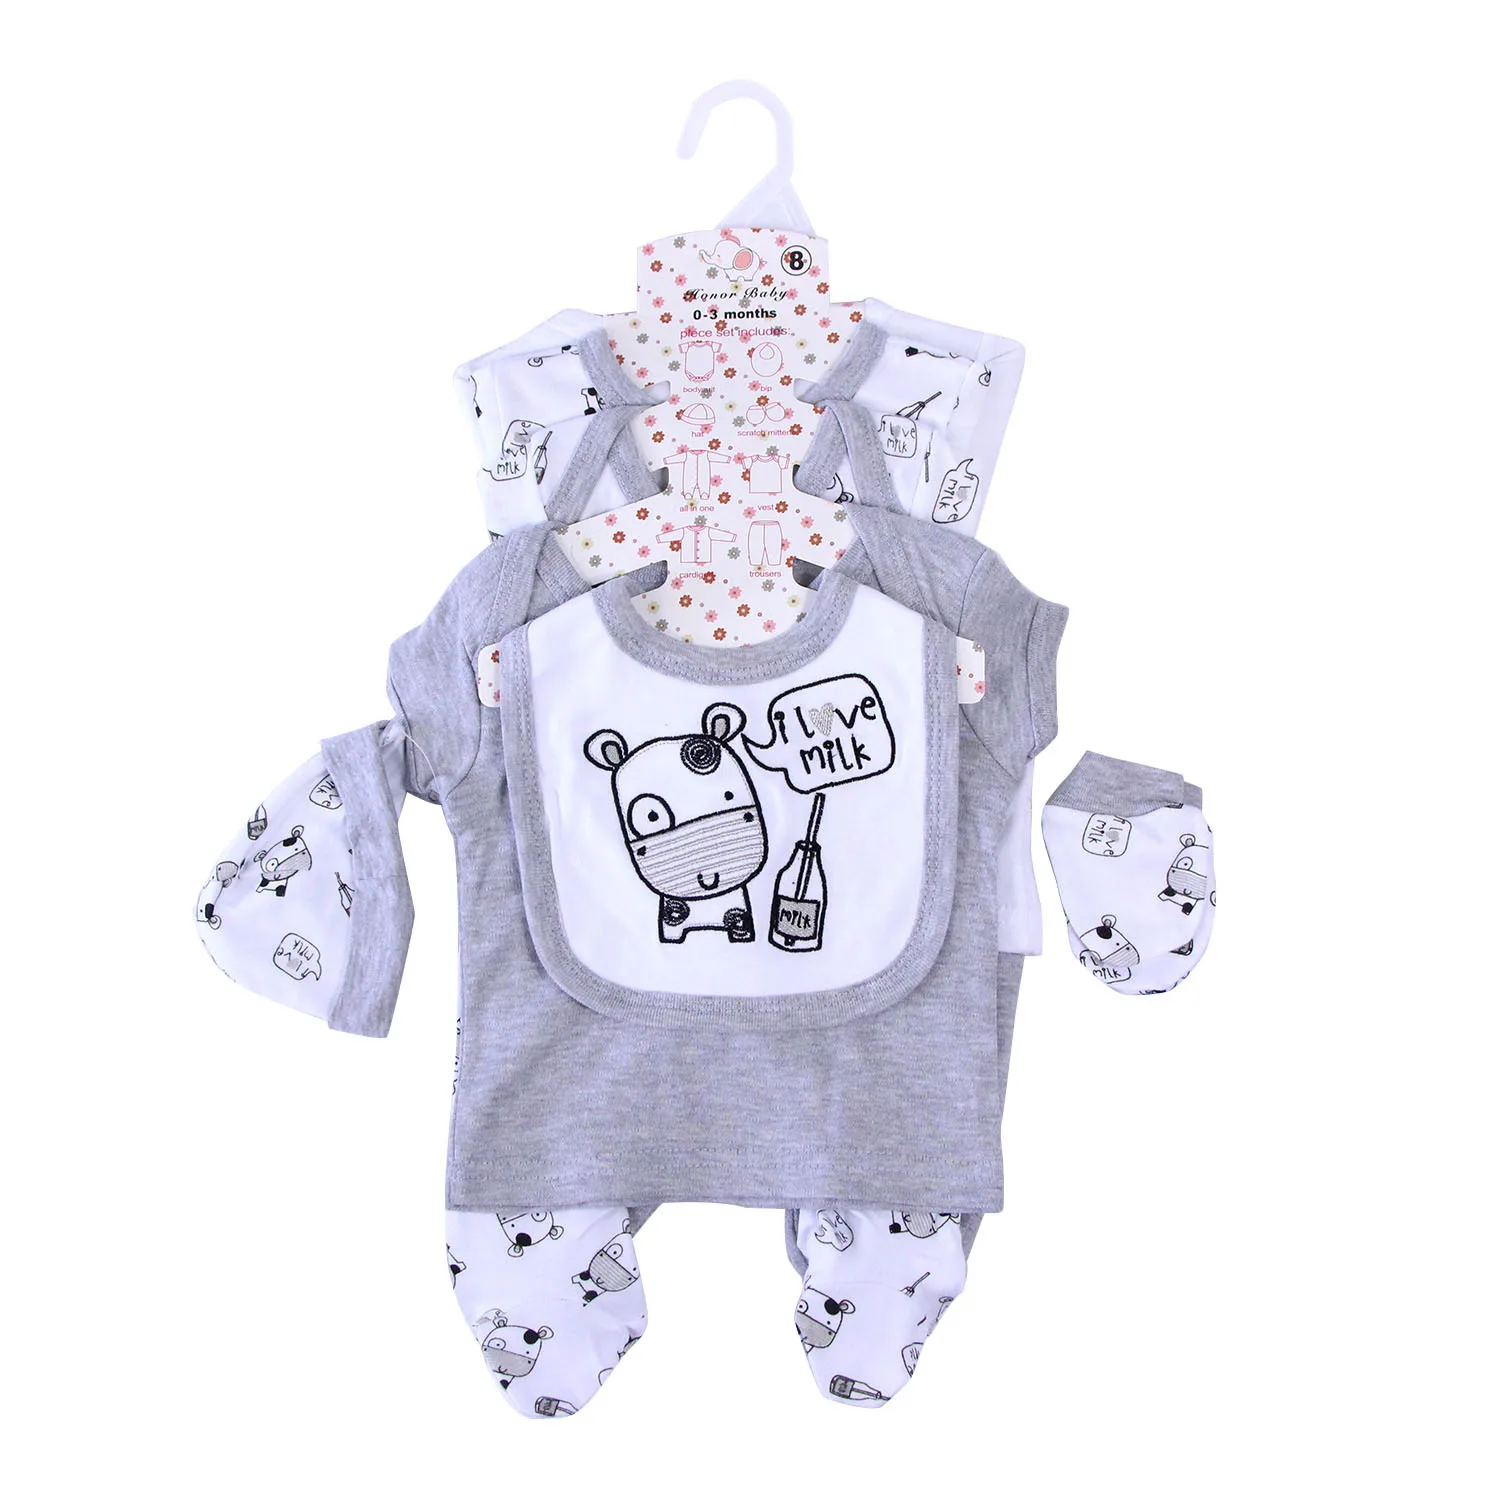 Summer hot sell organic cotton baby clothes romper newborn baby clothes sets in 8 pcs